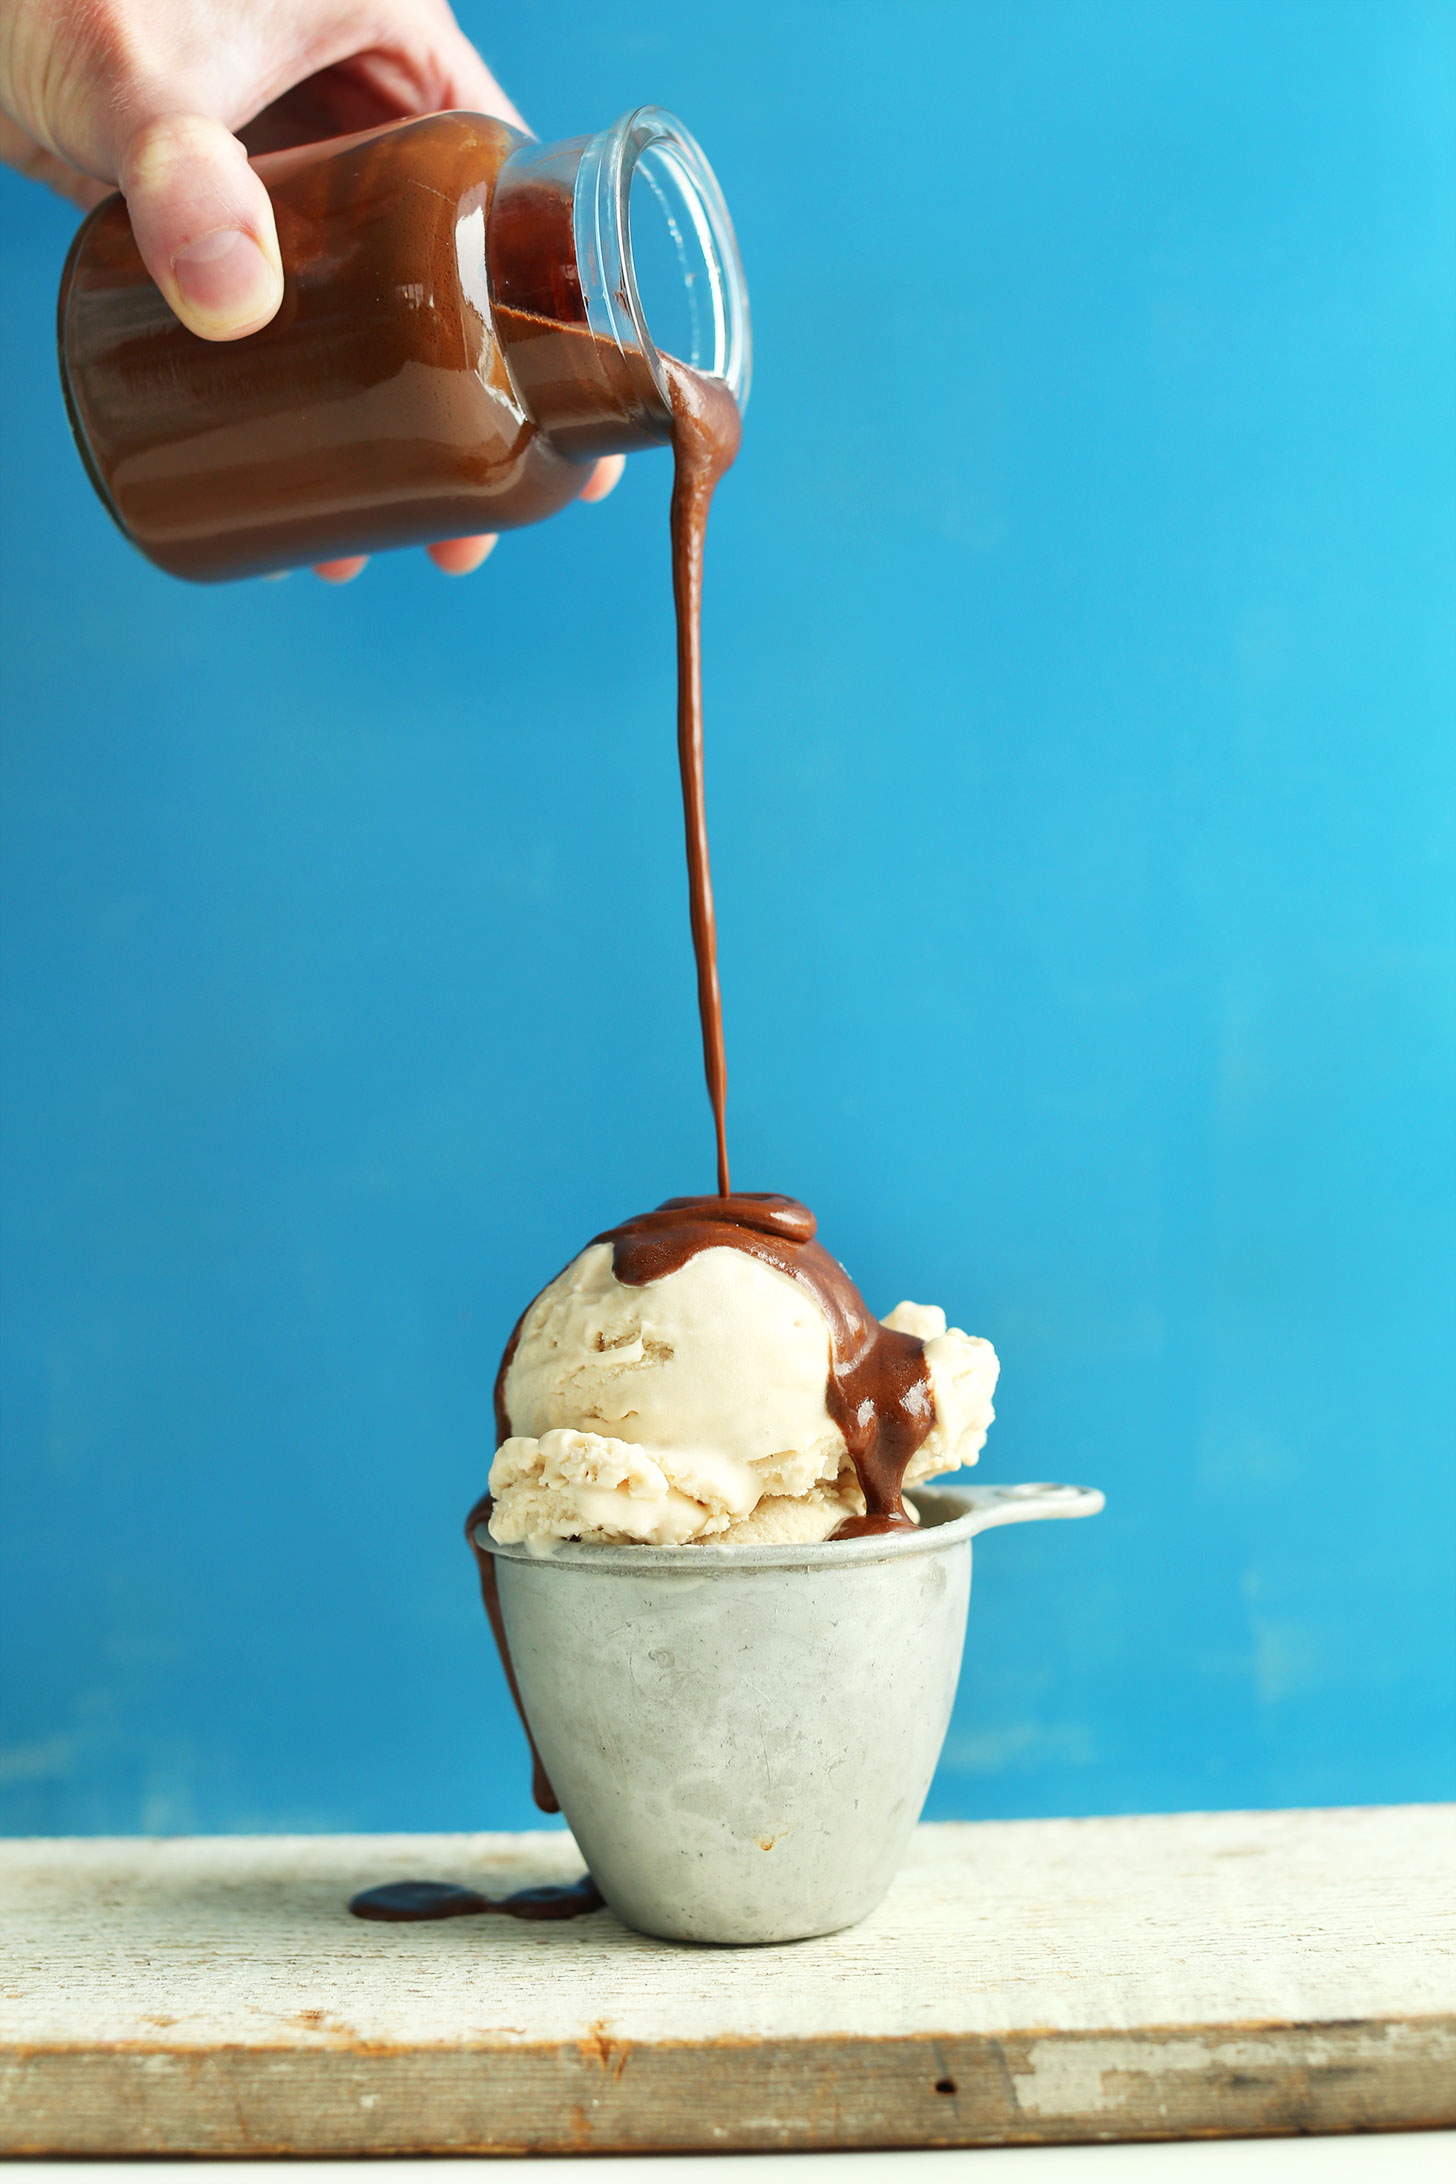 Pouring our homemade gluten-free naturally-sweetened chocolate sauce over a scoop of vegan ice cream